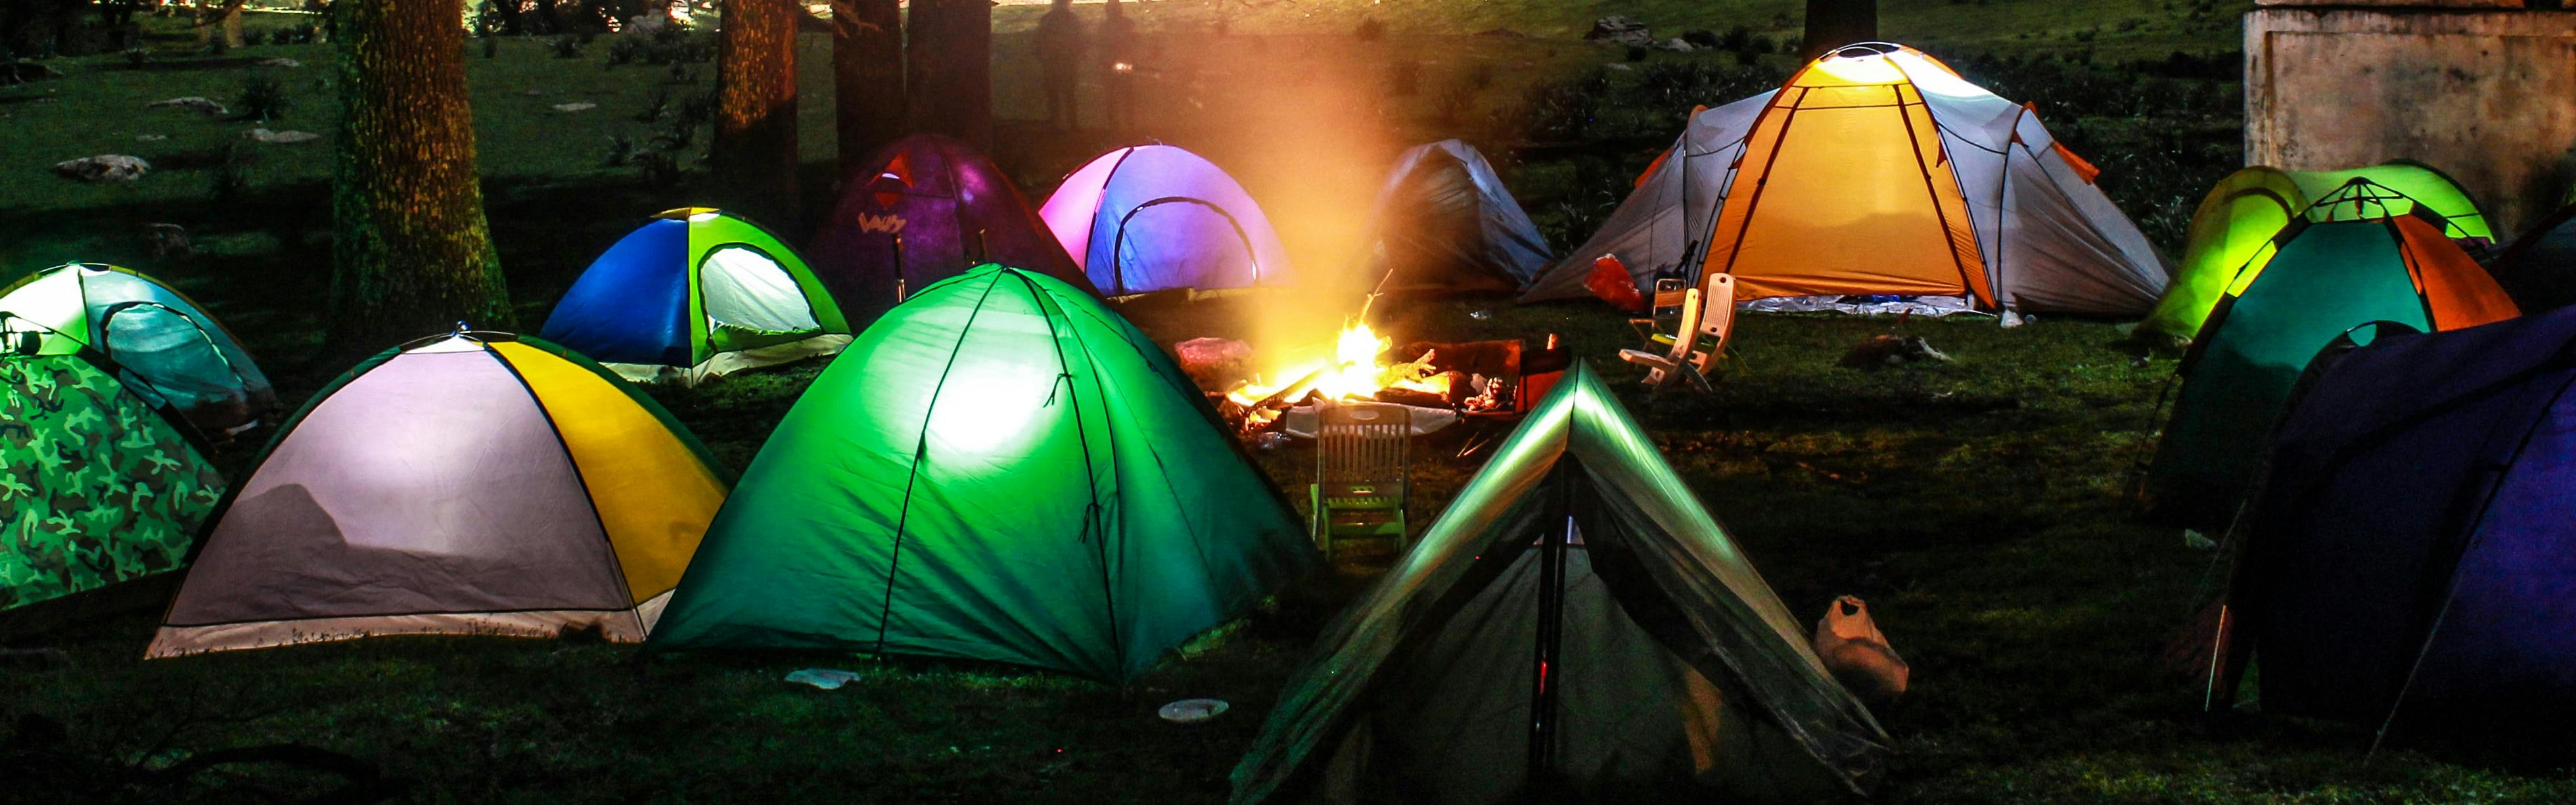 Gang verbinding verbroken Humanistisch What Are the Different Types of Tents? | Curated.com